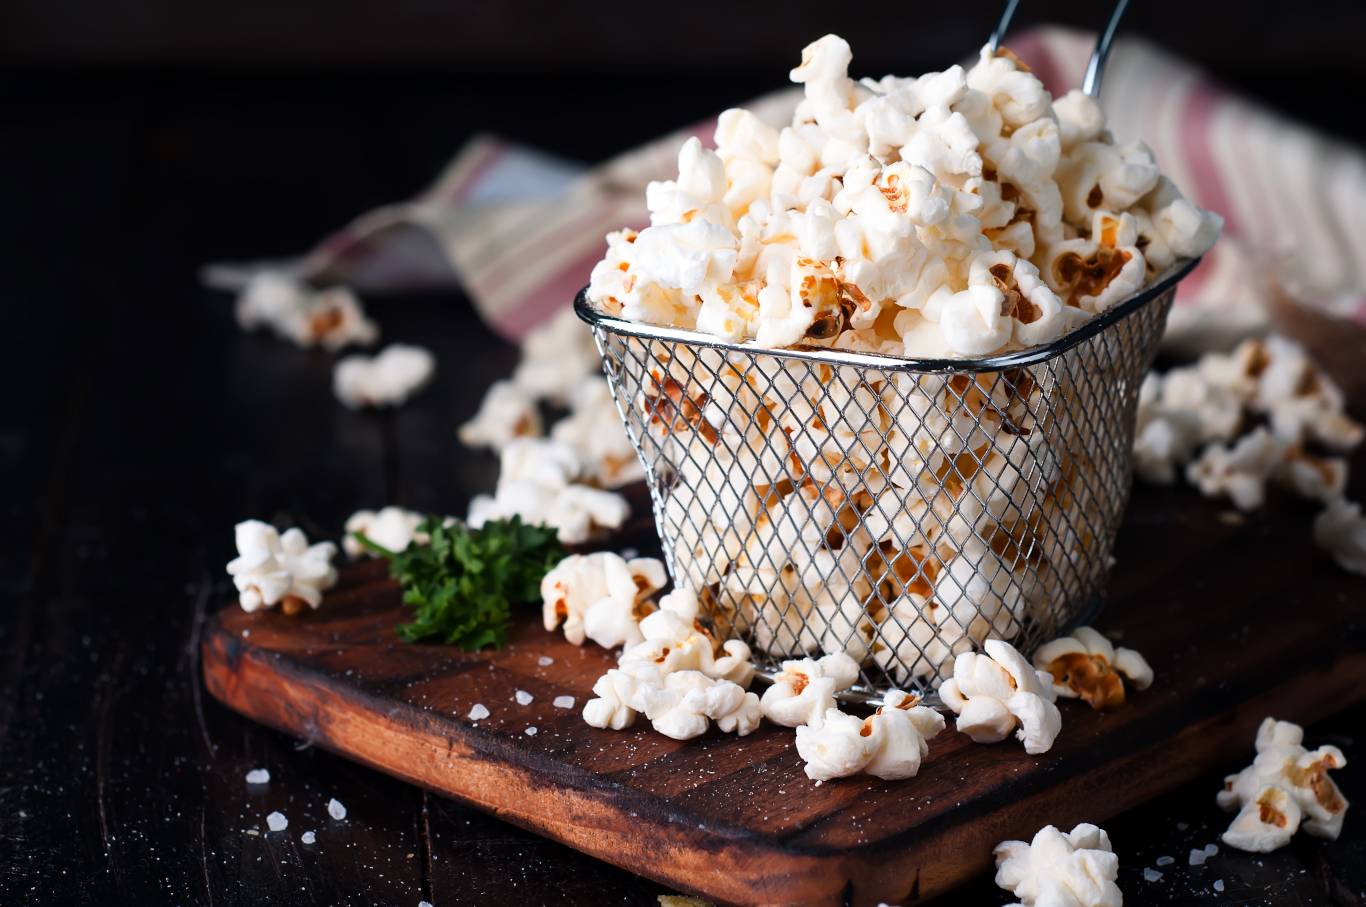 Salt popcorn in a basket on the wooden table